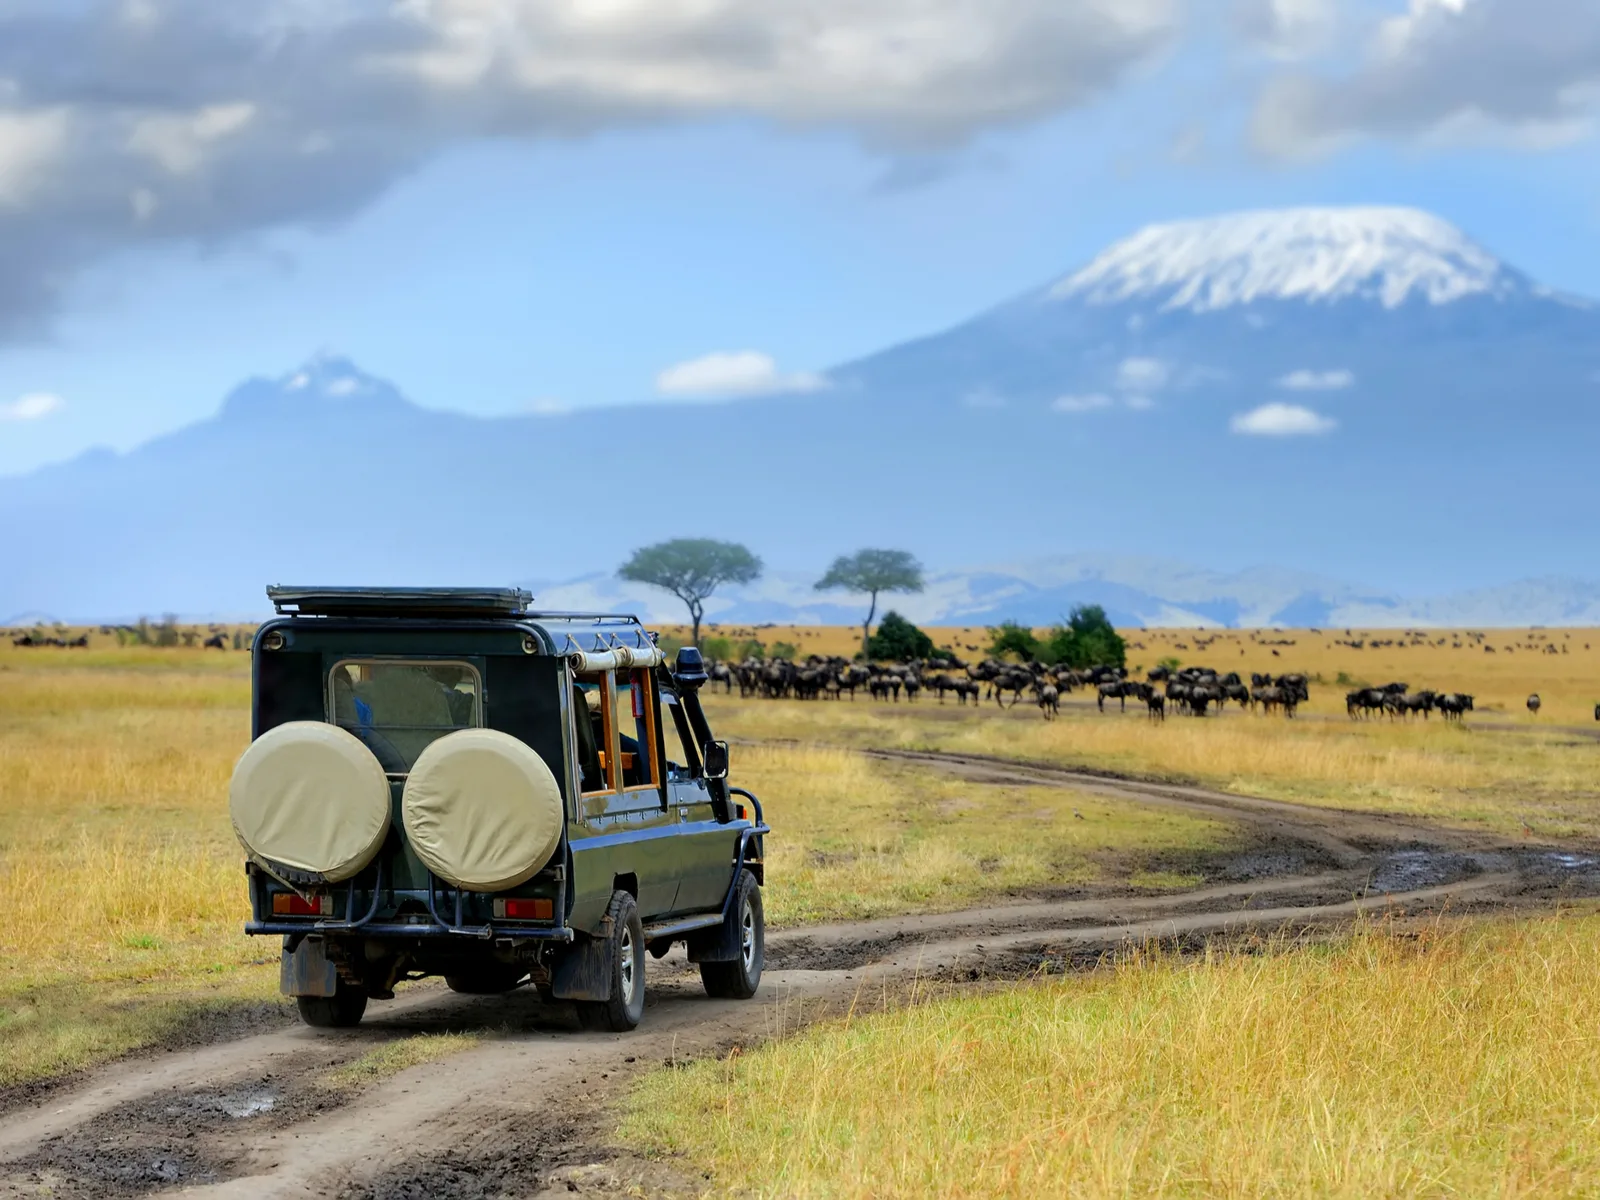 Land rover taking people on one of the best Safaris in Africa, the Serengeti National Park